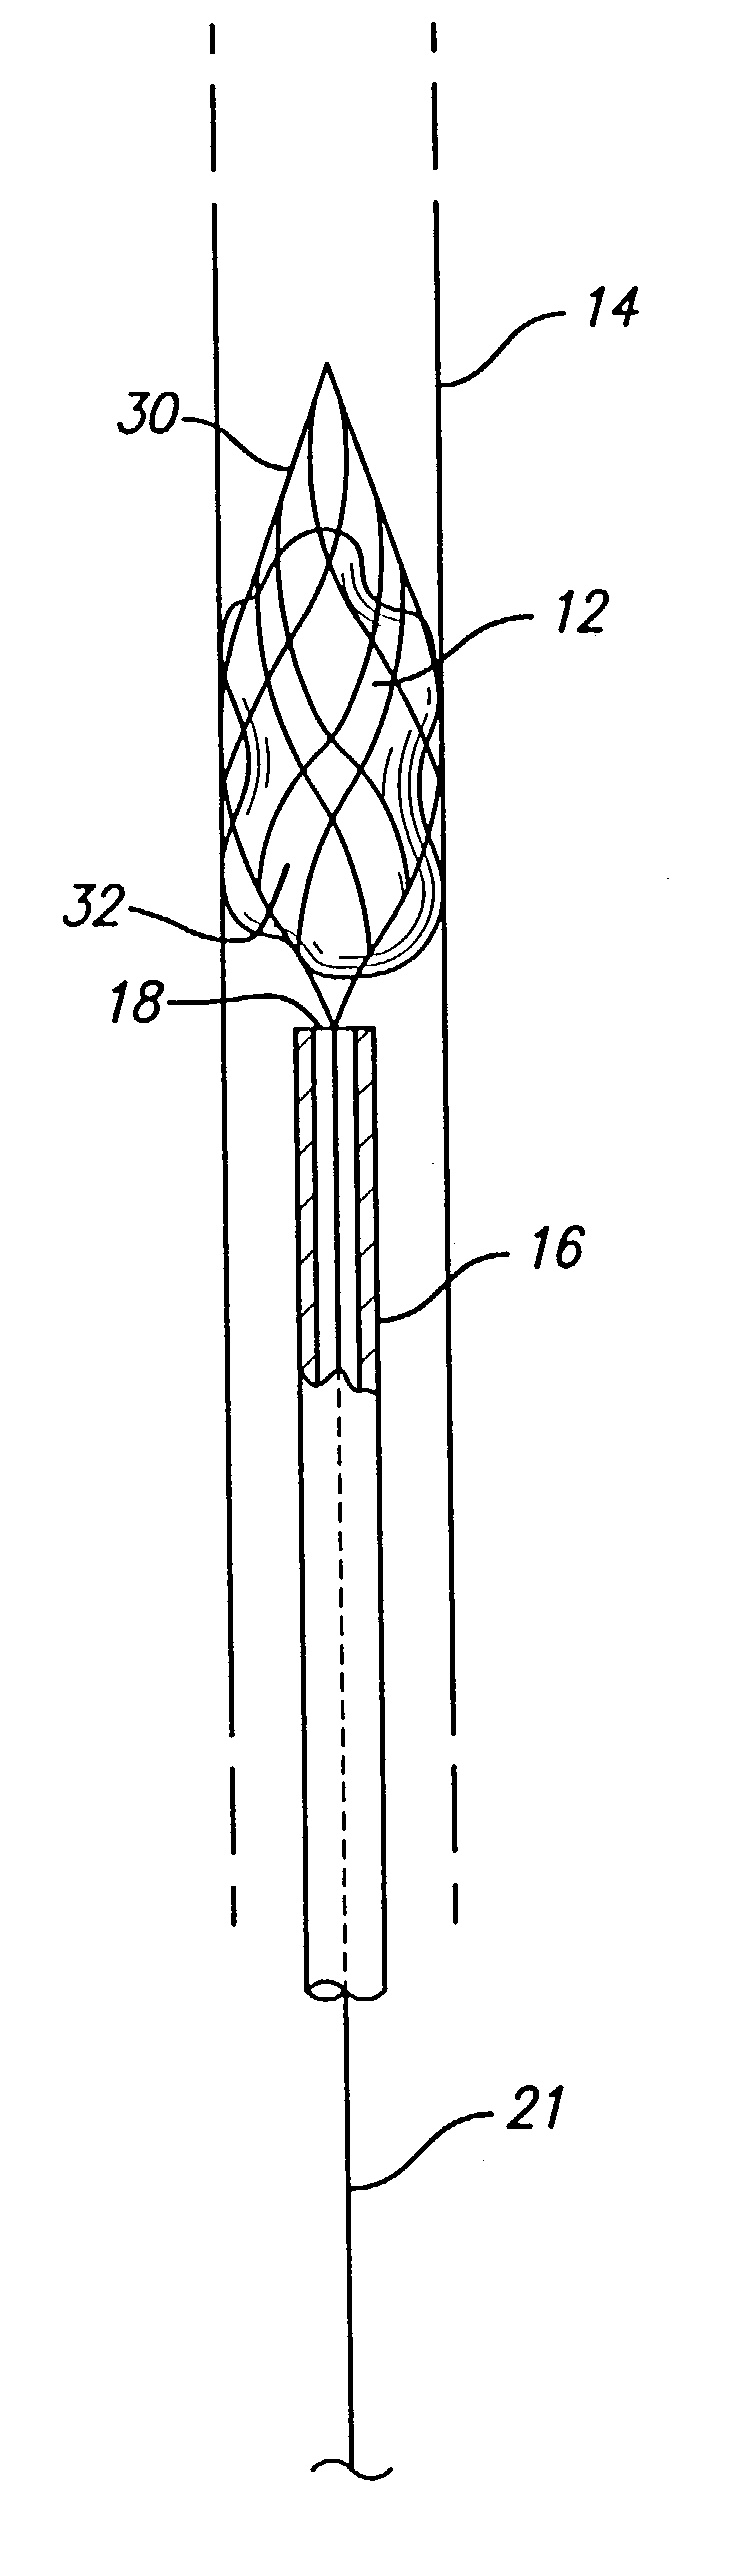 Device for removal of thrombus through physiological adhesion